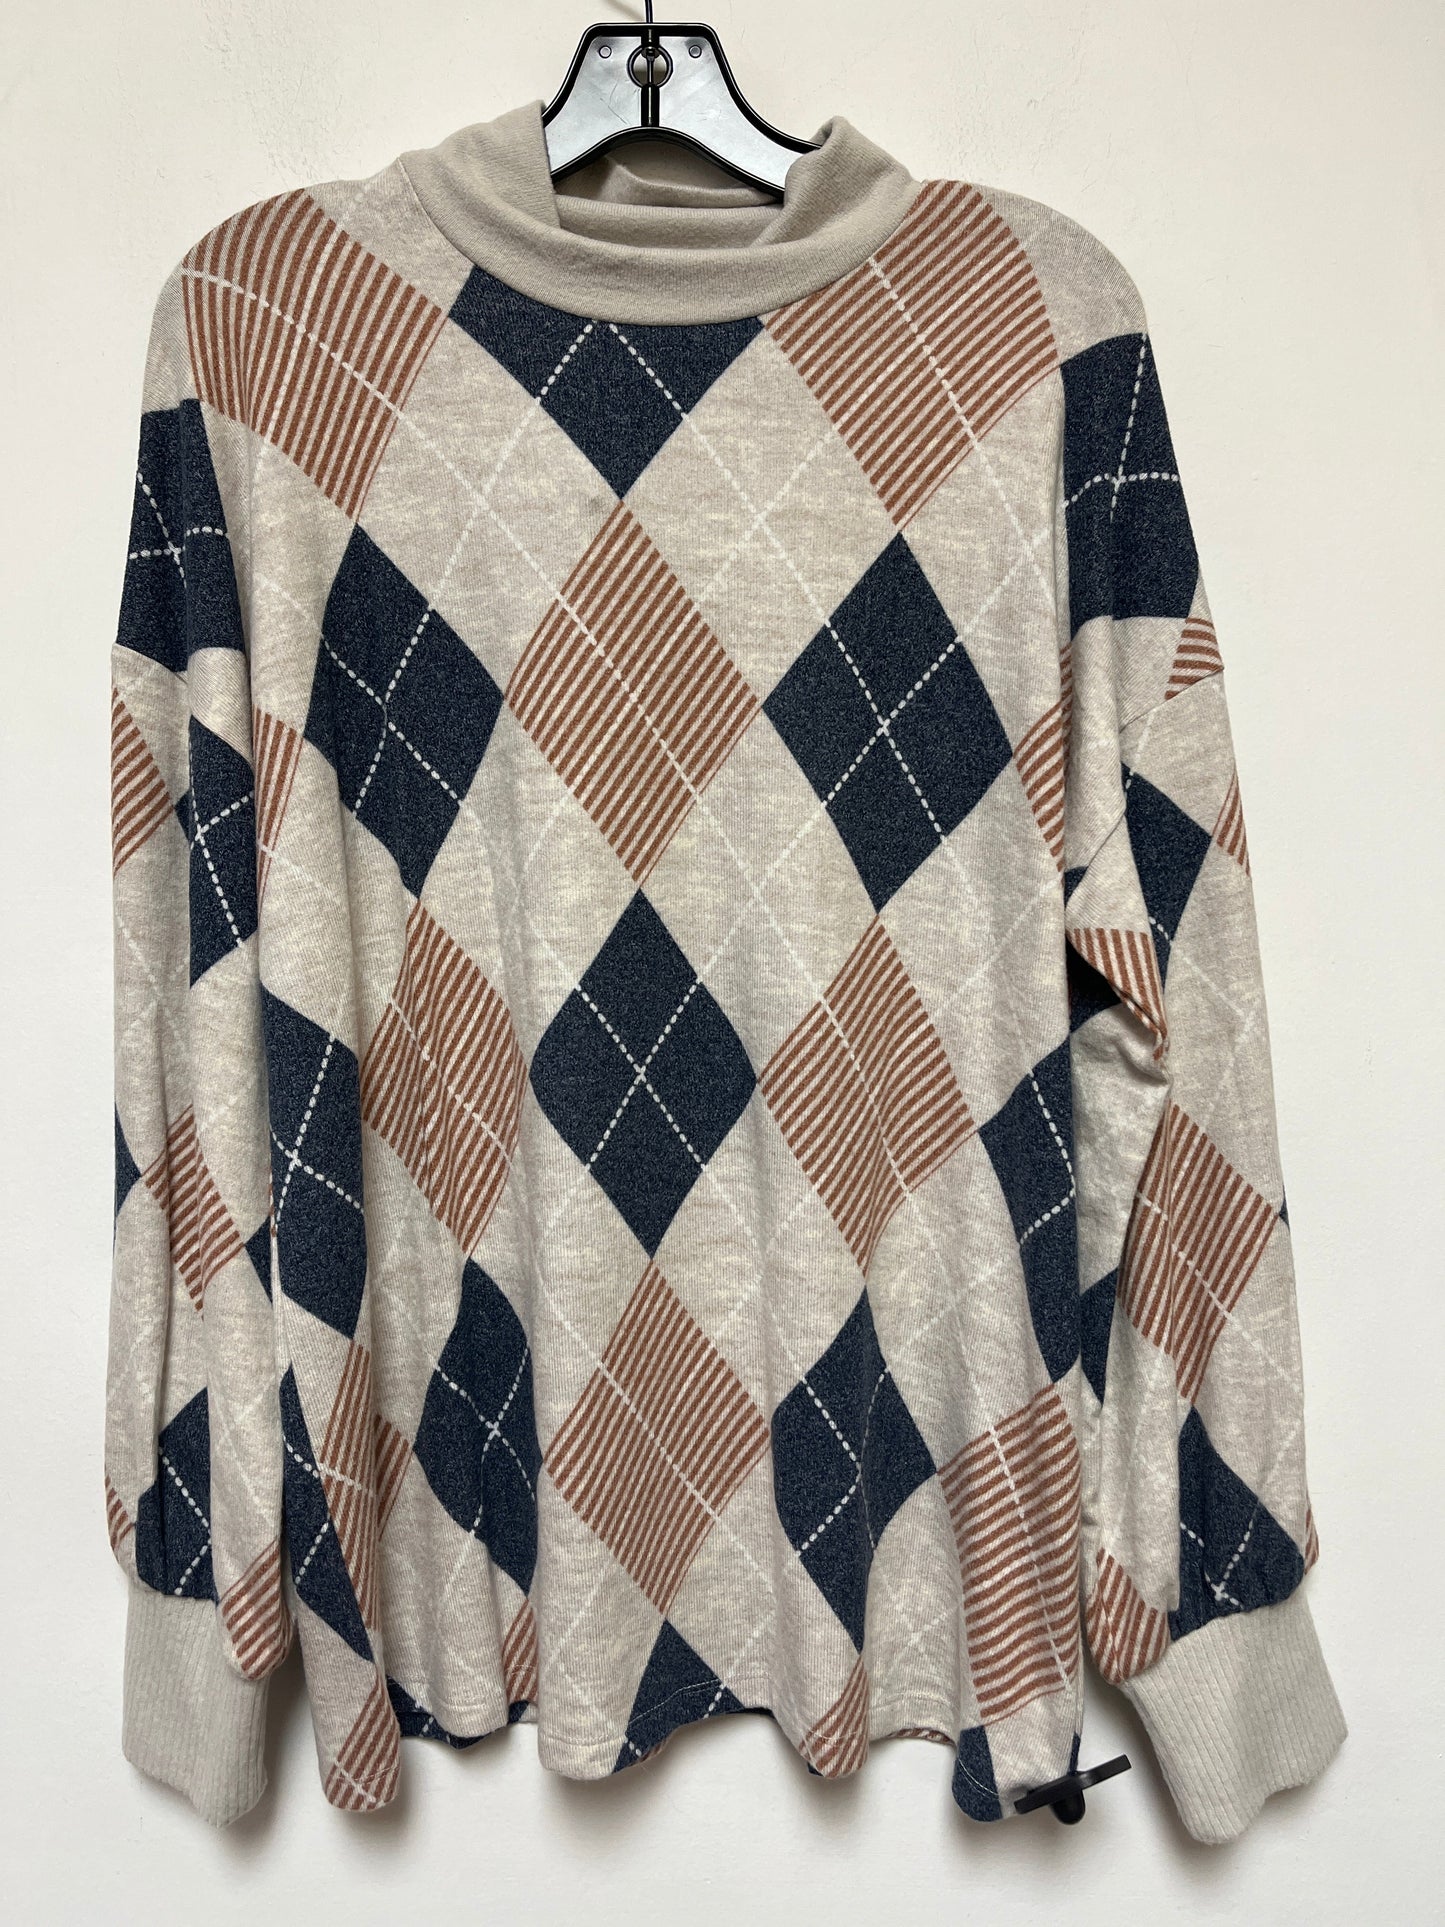 Top Long Sleeve By Maurices  Size: L